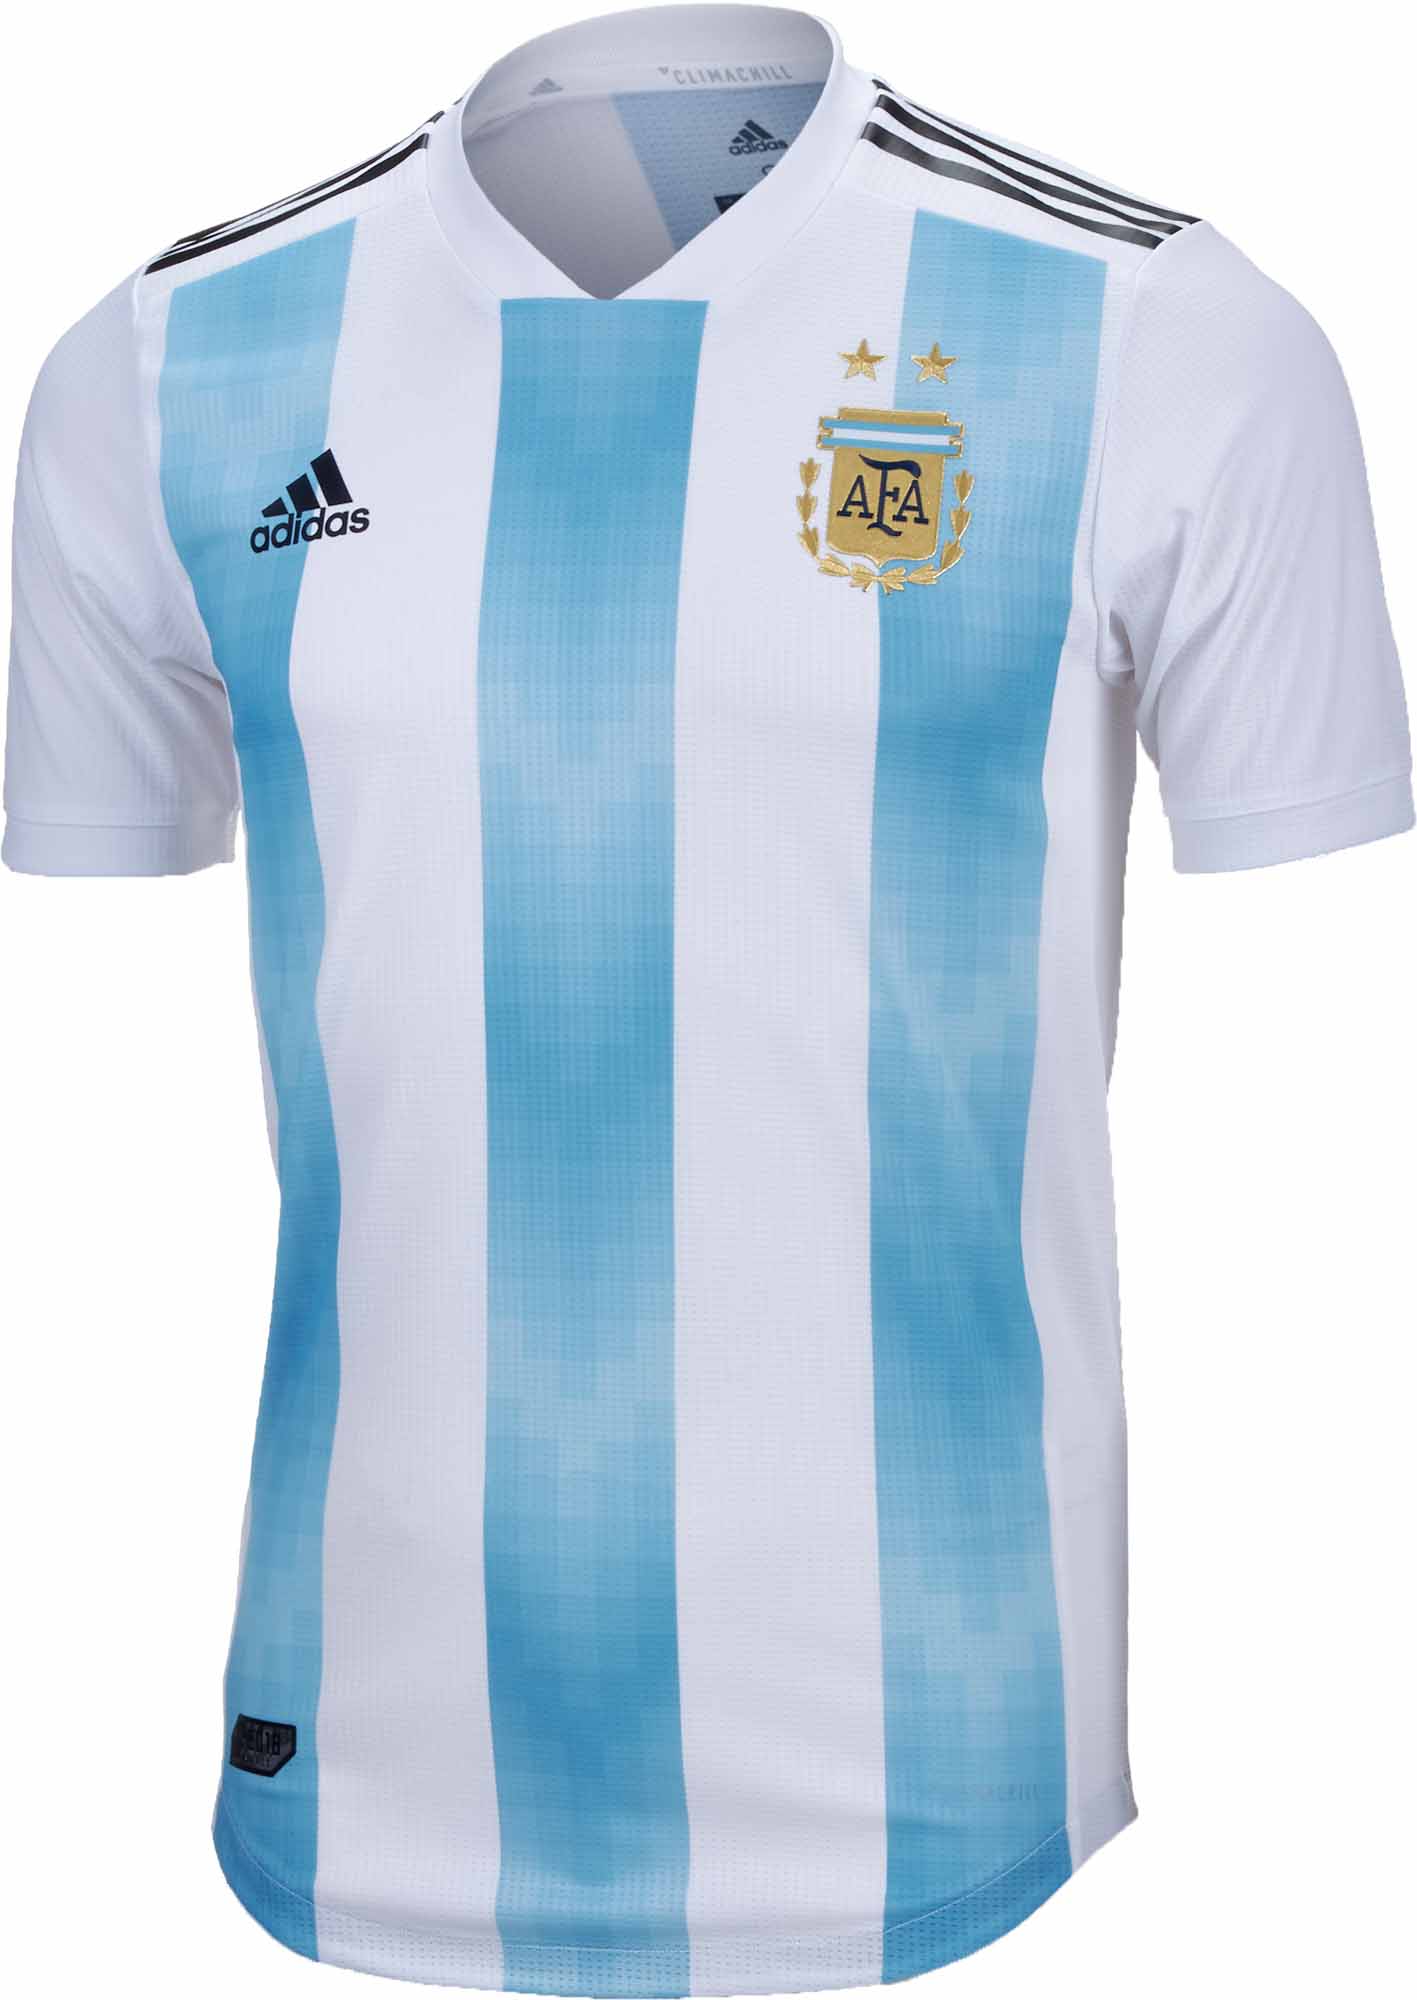 2018-19 adidas Argentina Authentic Jersey Soccer Master